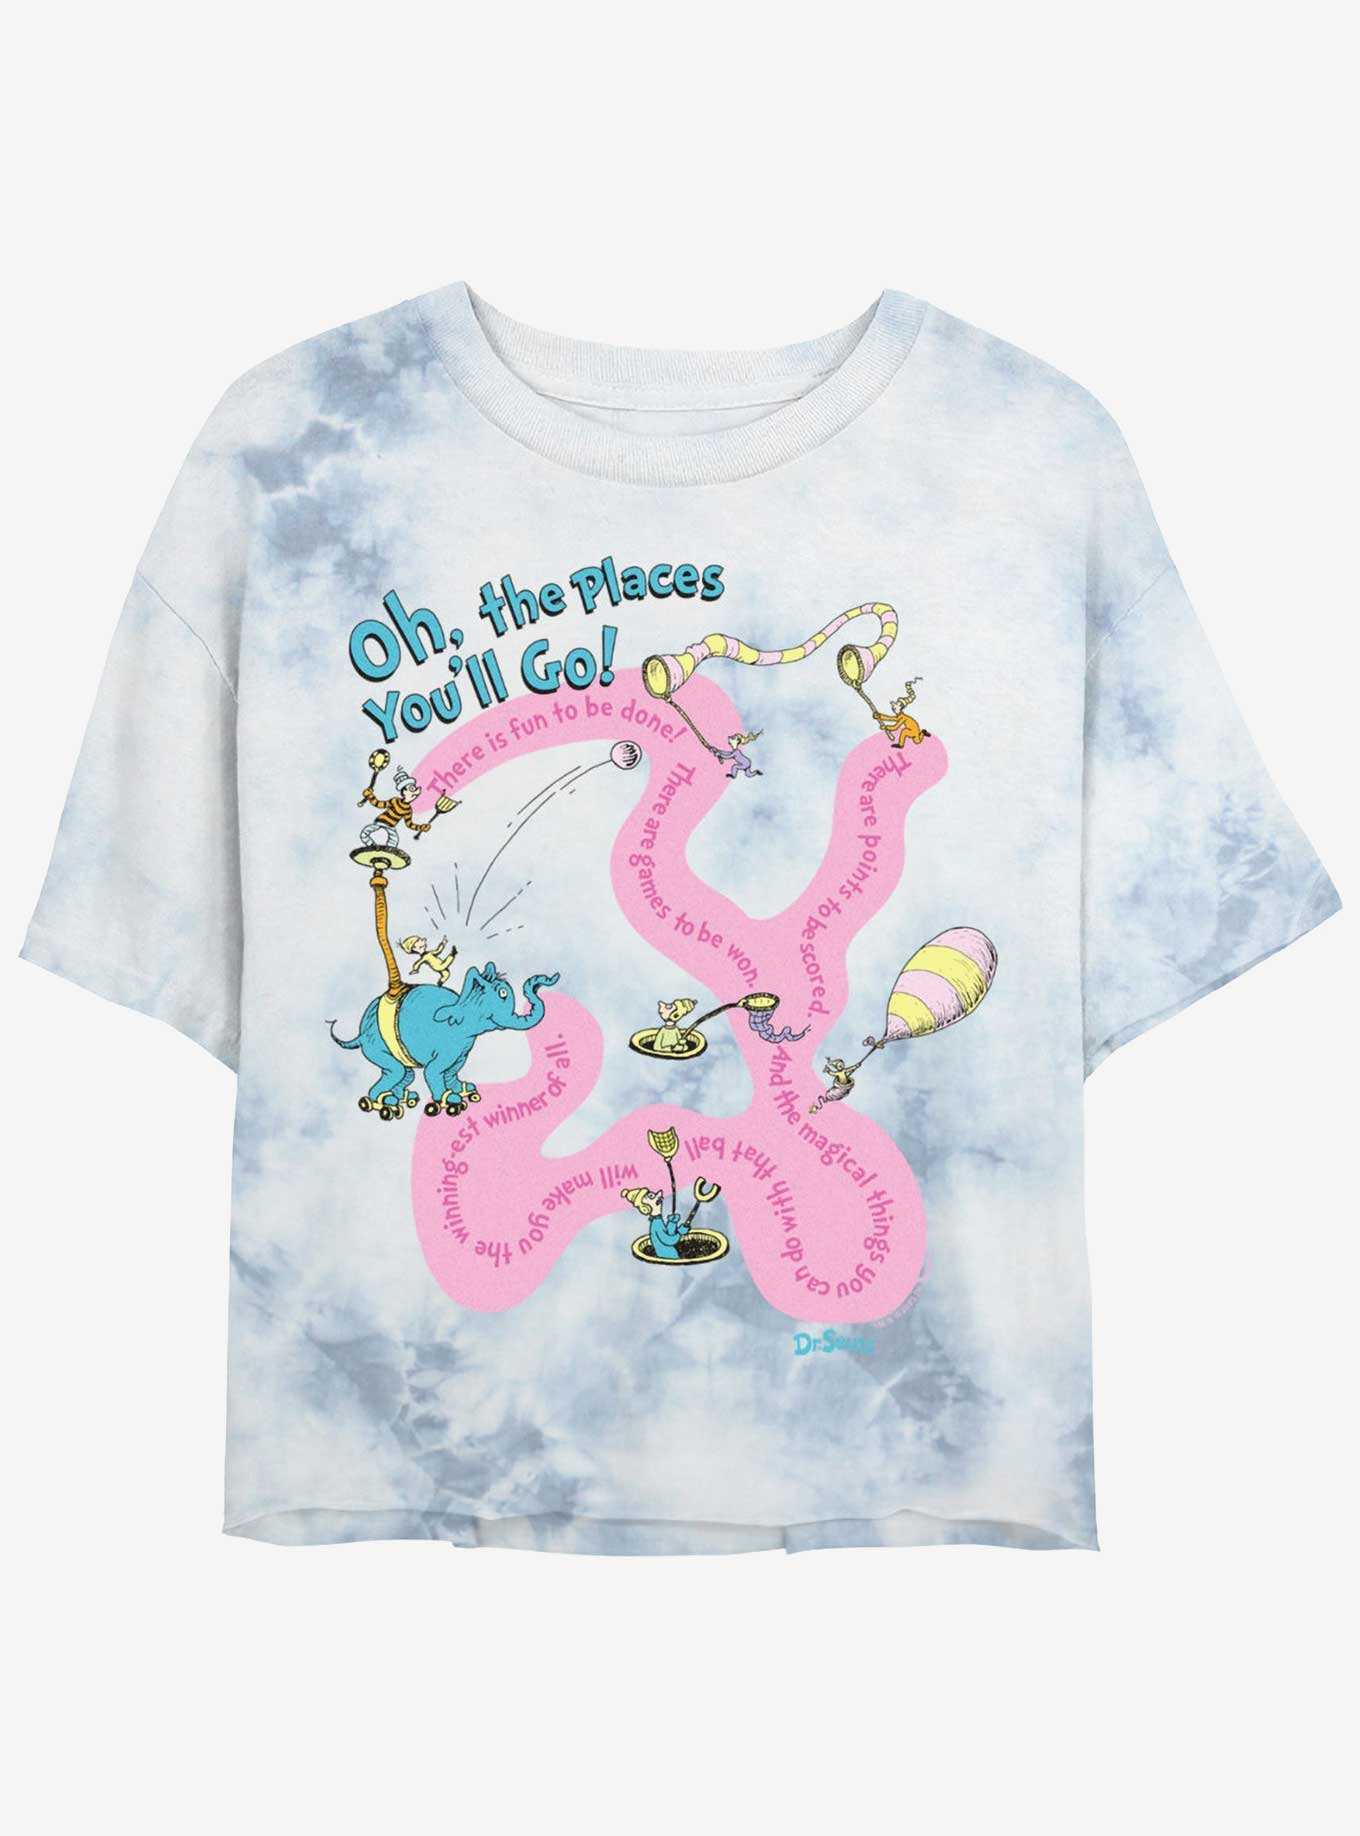 Dr. Seuss Journeying The Places You'Ll Go Tie Dye Crop Girls T-Shirt, , hi-res